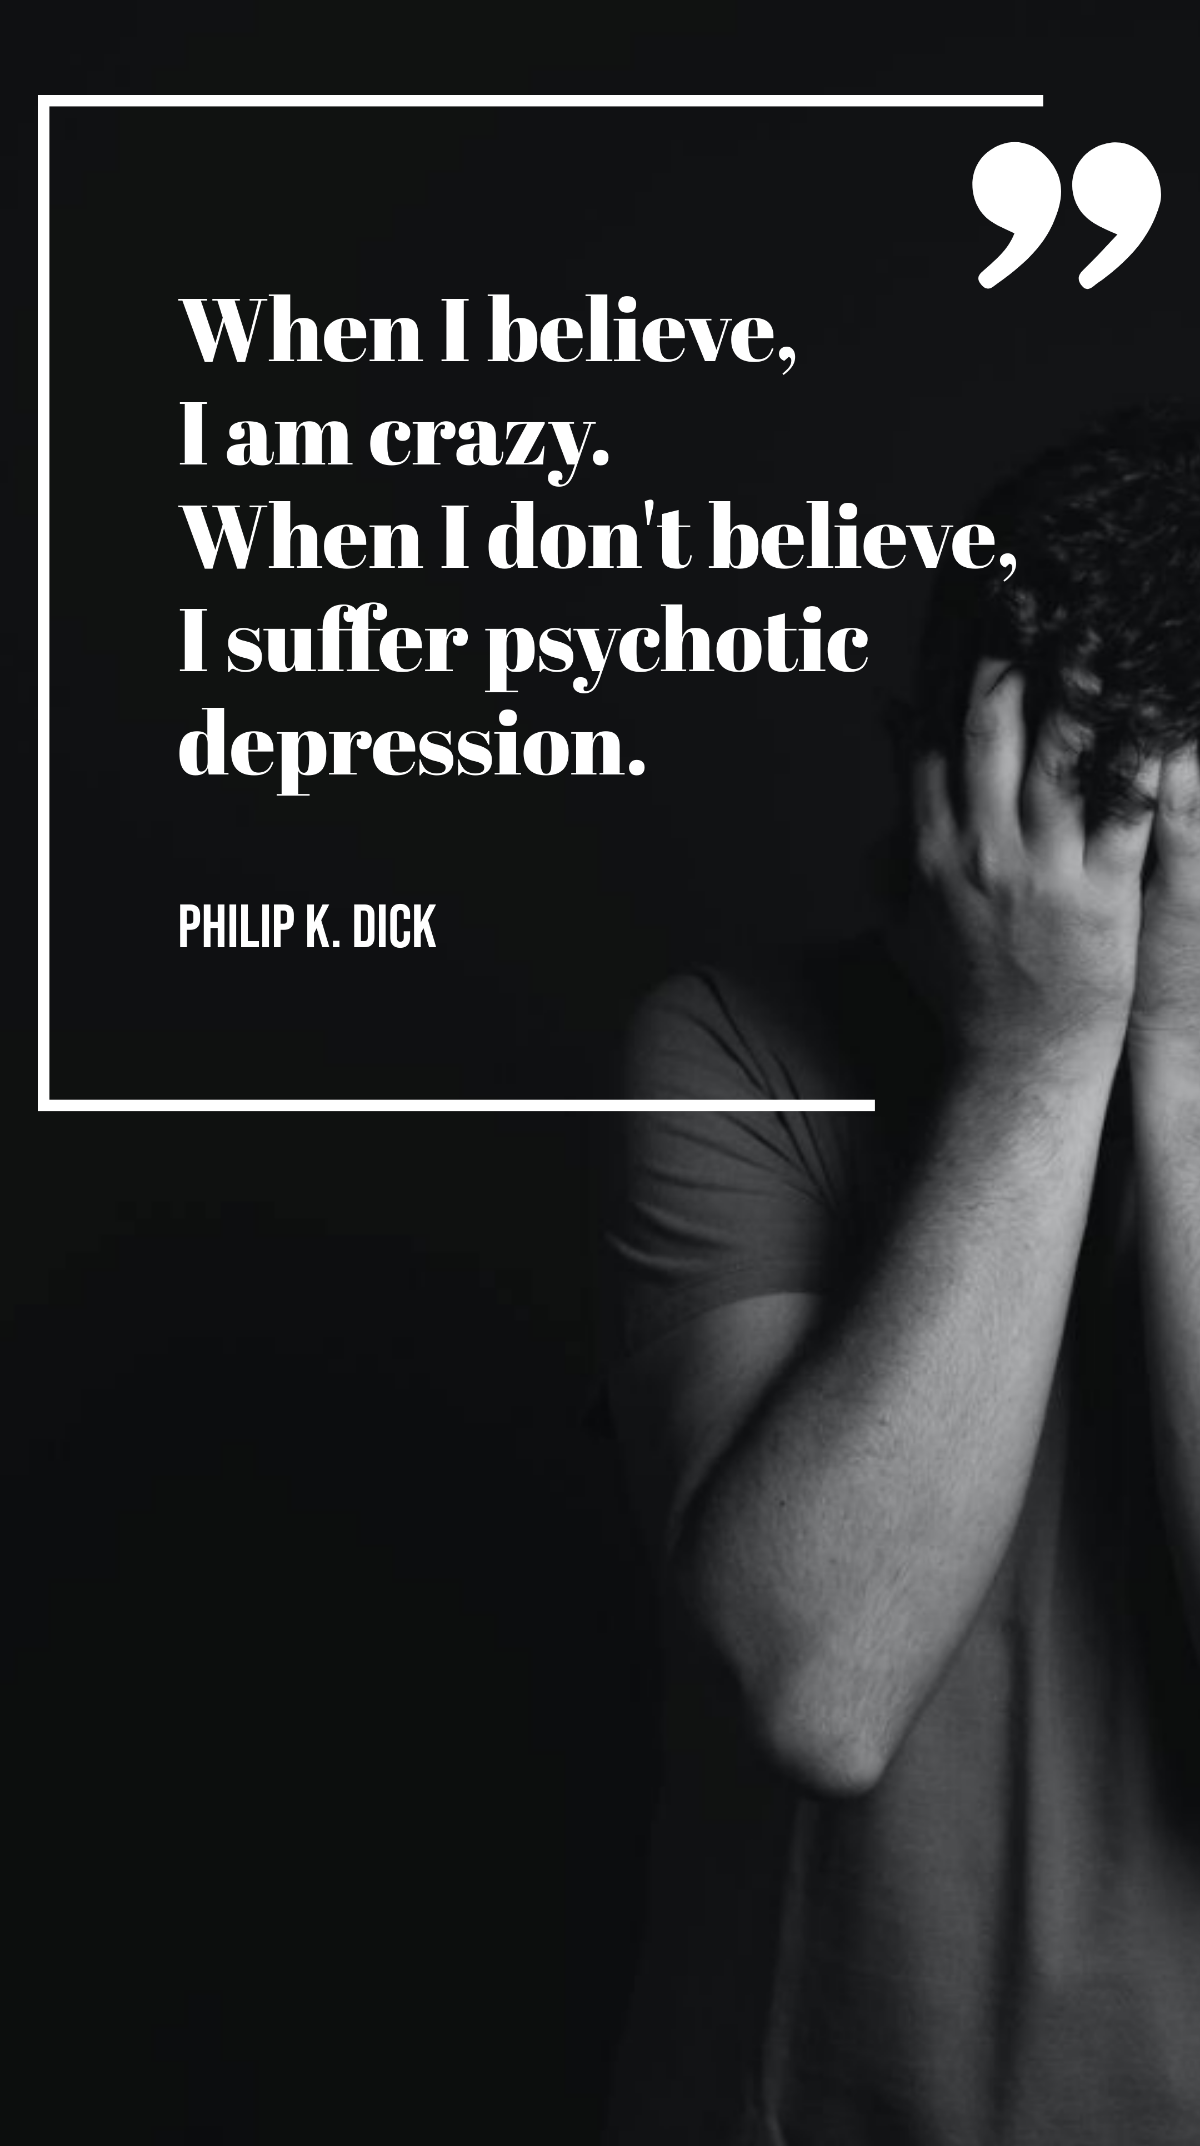 Philip K. Dick - When I believe, I am crazy. When I don't believe, I suffer psychotic depression. Template